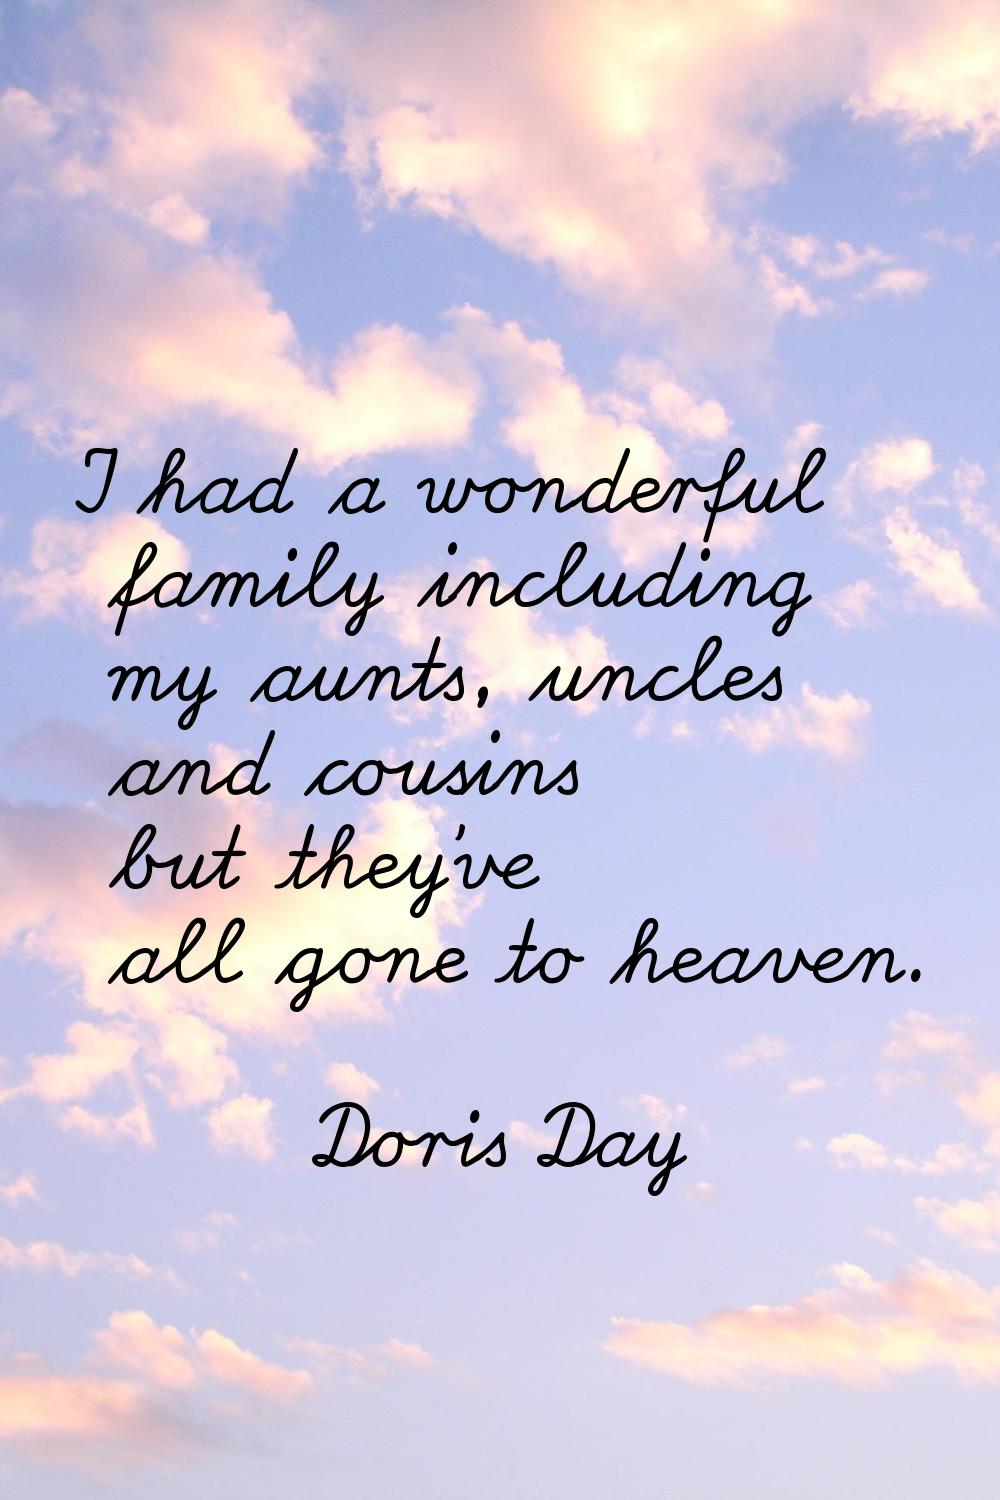 I had a wonderful family including my aunts, uncles and cousins but they've all gone to heaven.